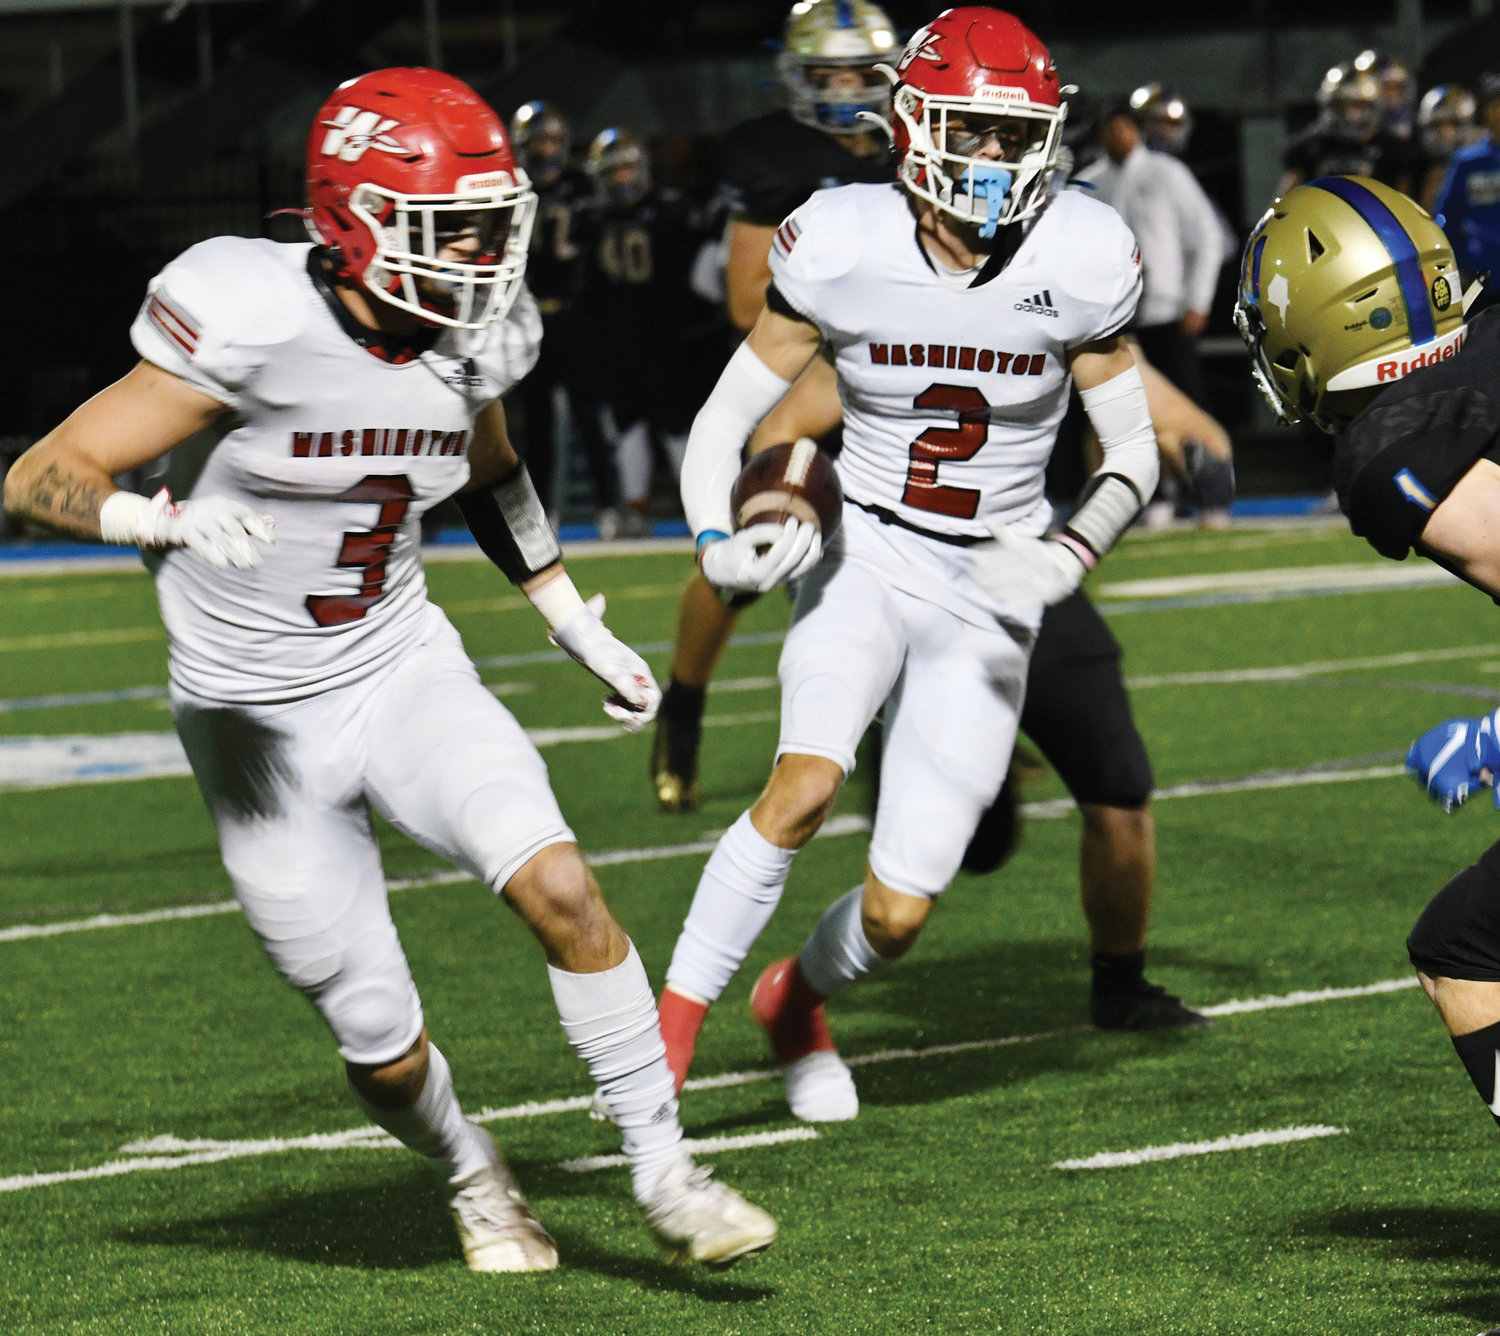 Washington senior Luke Hendrix (2) carries the ball Friday night during the Warriors’ 54-28 win over Rejoice Christian. Hendrix scored three touchdowns in the game. Washington plays  Beggs this Friday night in the State semifinals at Langston University at 7 p.m.